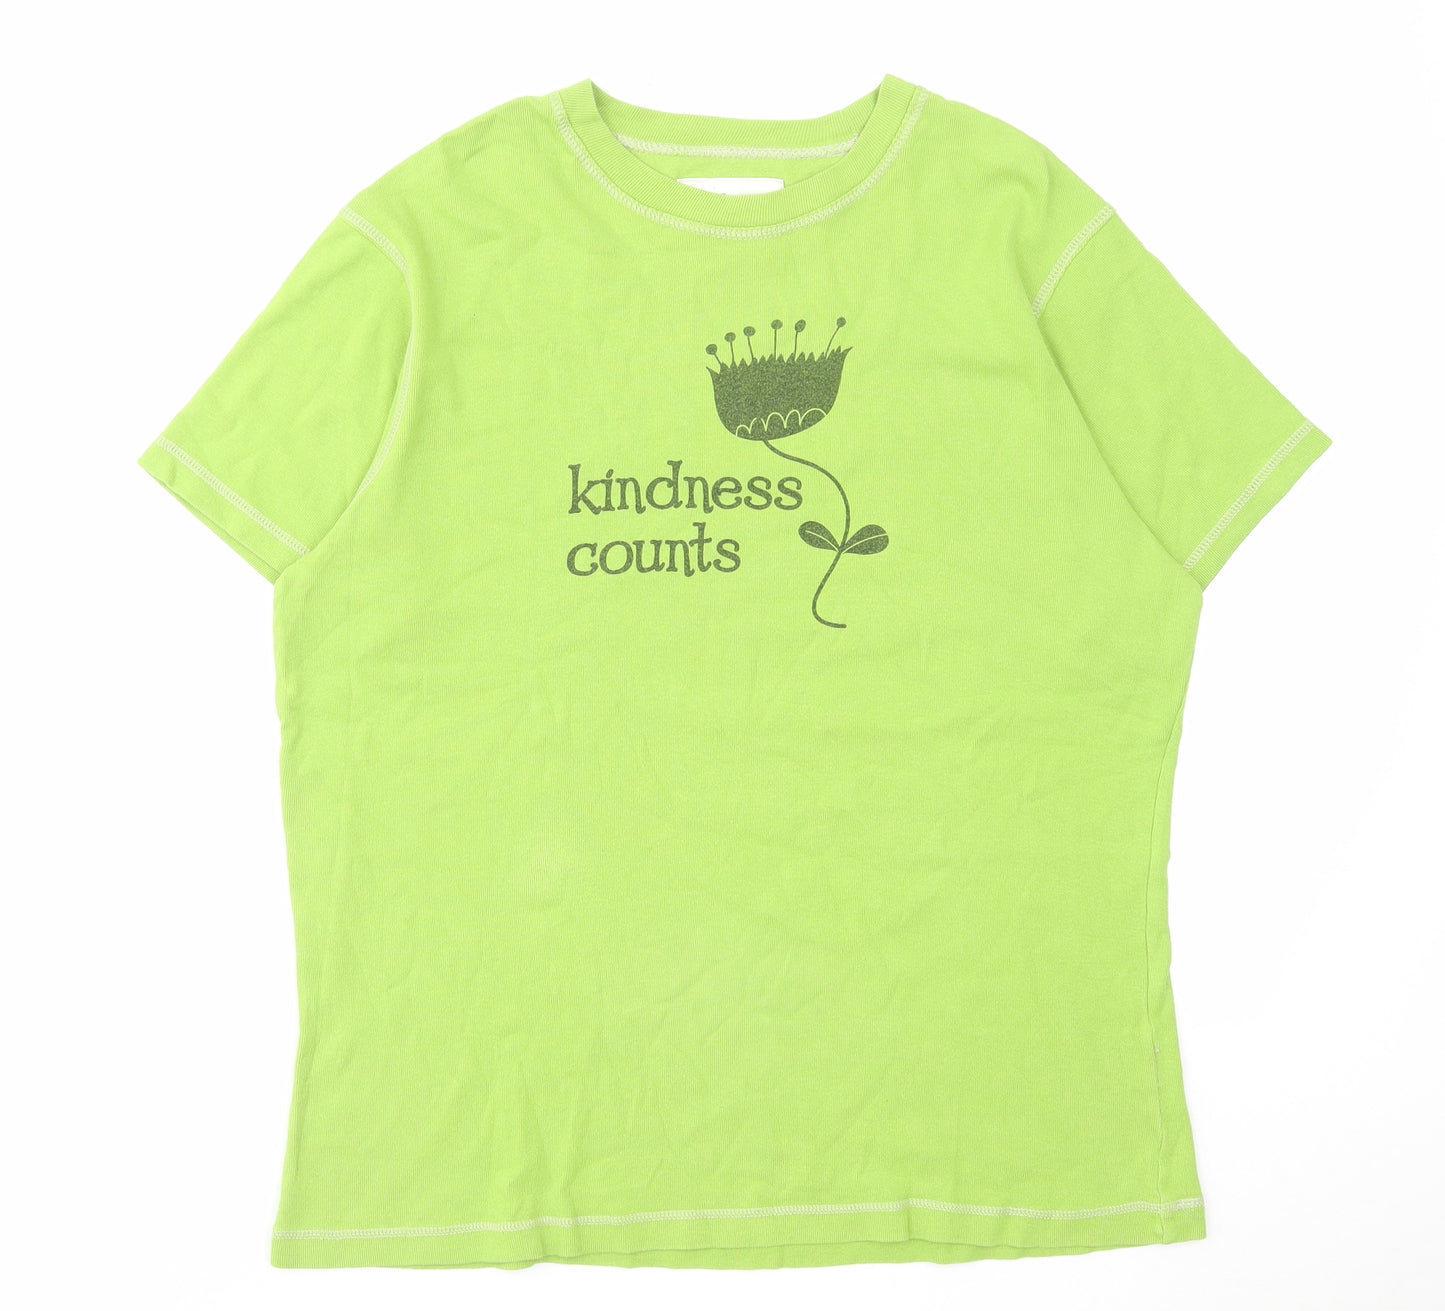 GetNoSweat Womens Green Cotton Basic T-Shirt Size L Round Neck - Kindness Counts